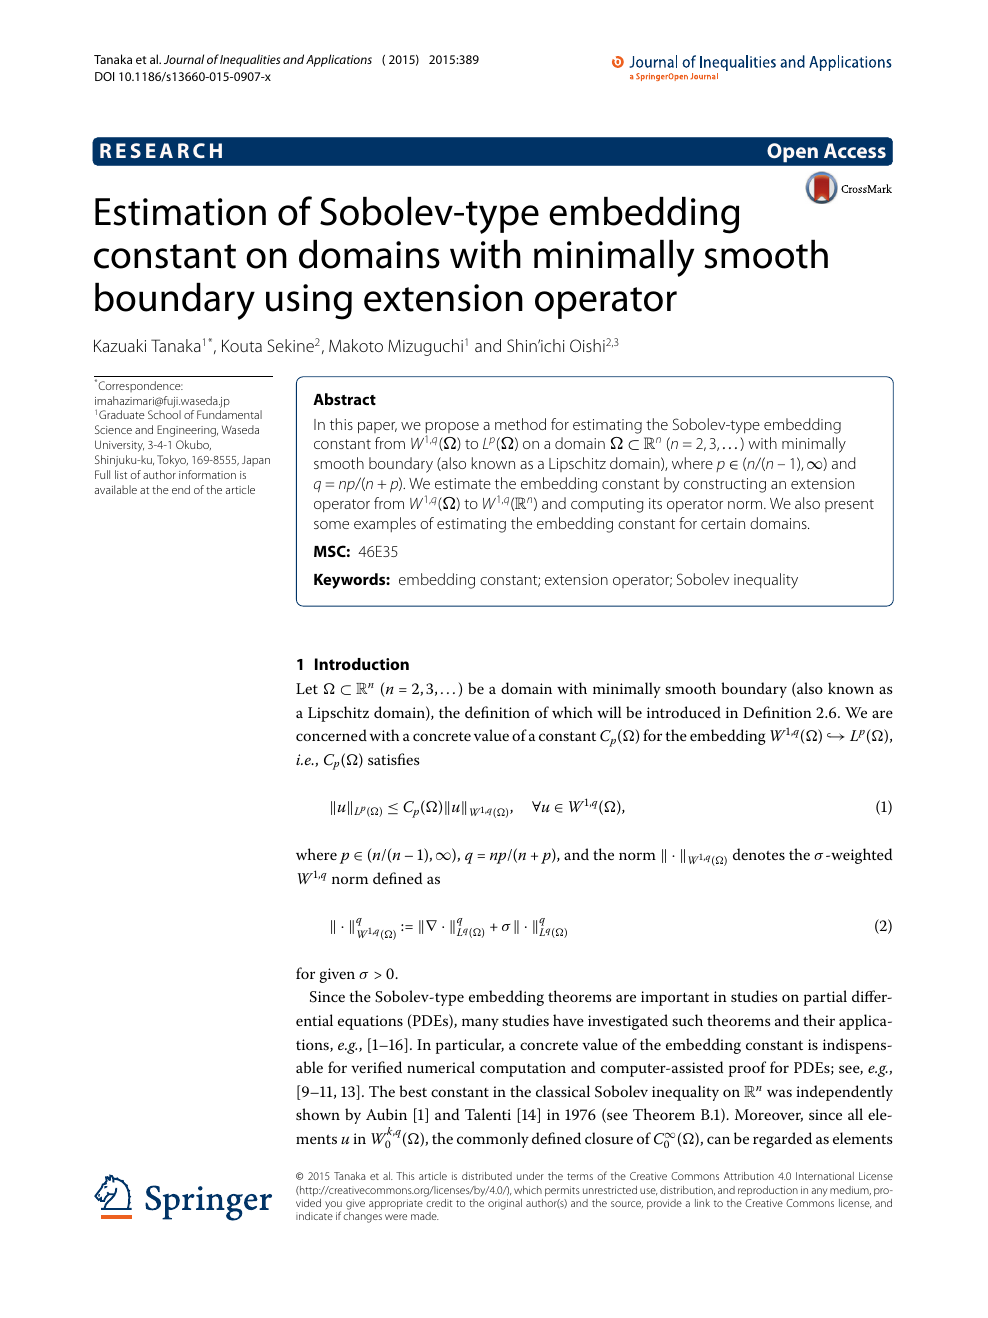 Estimation Of Sobolev Type Embedding Constant On Domains With Minimally Smooth Boundary Using Extension Operator Topic Of Research Paper In Mathematics Download Scholarly Article Pdf And Read For Free On Cyberleninka Open